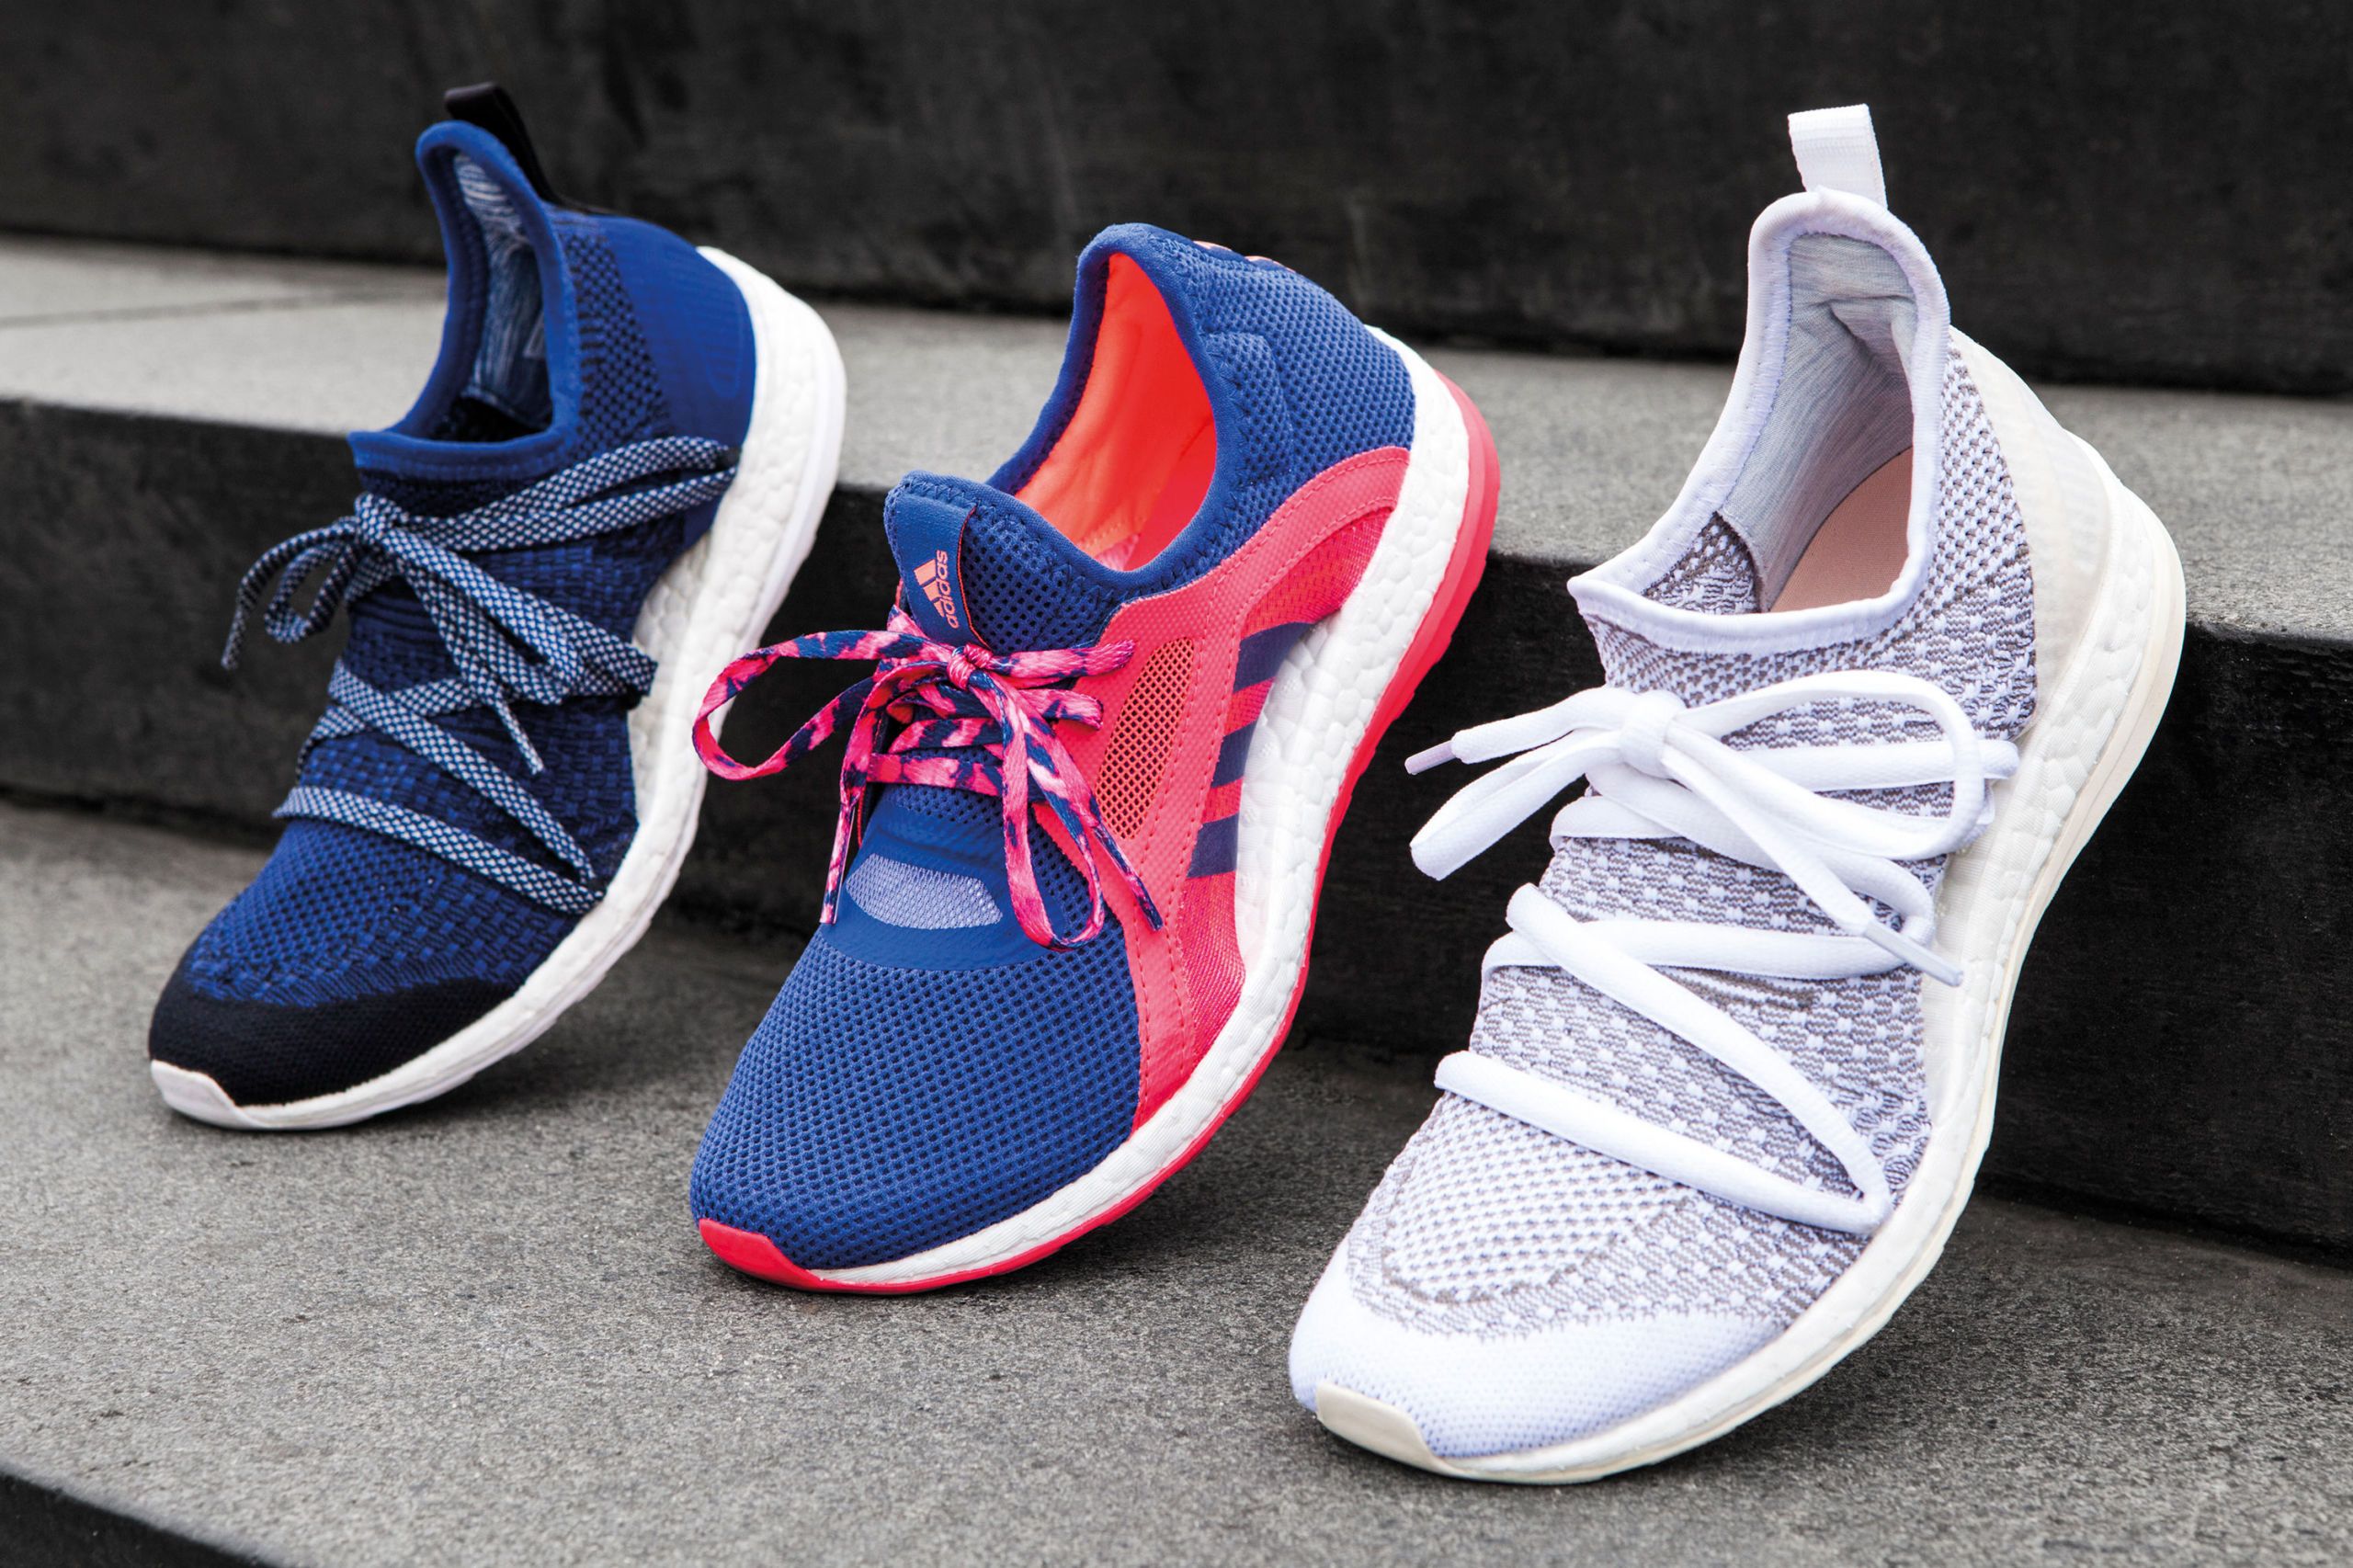 adidas pure boost x women's running shoes